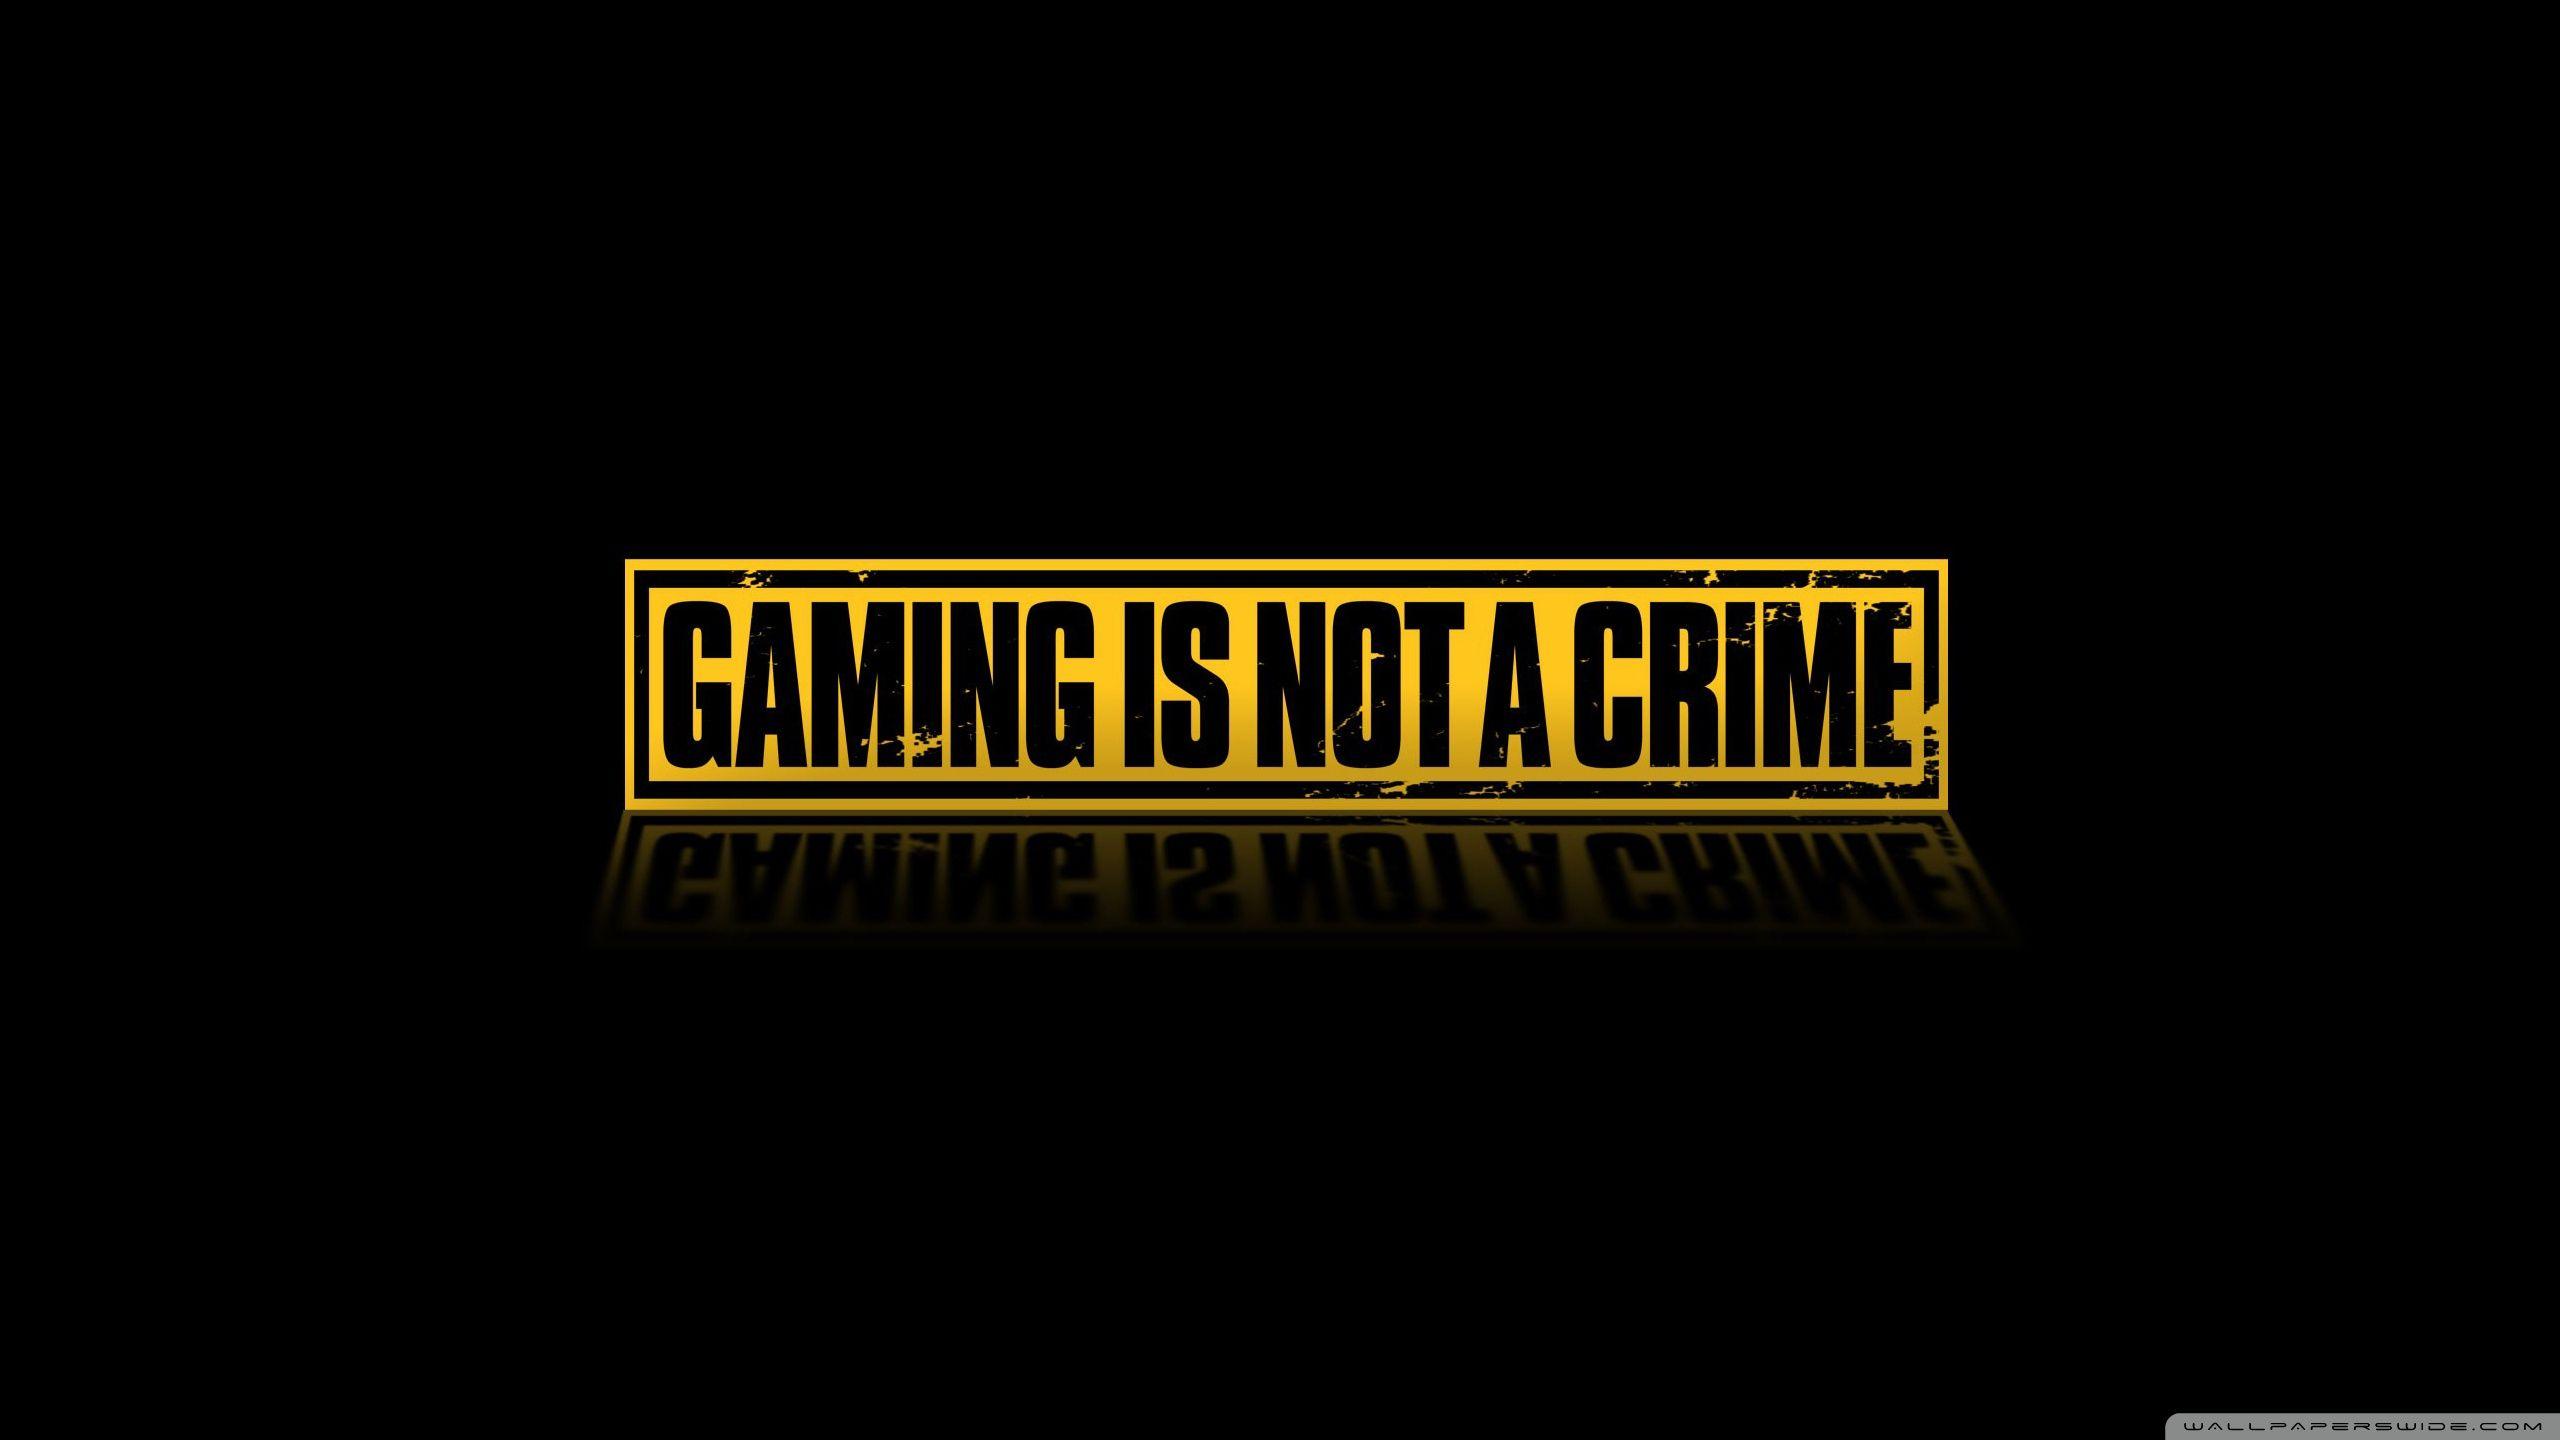 Gaming Is Not A Crime Ultra HD Desktop Background Wallpaper for 4K UHD TV, Multi Display, Dual Monitor, Tablet